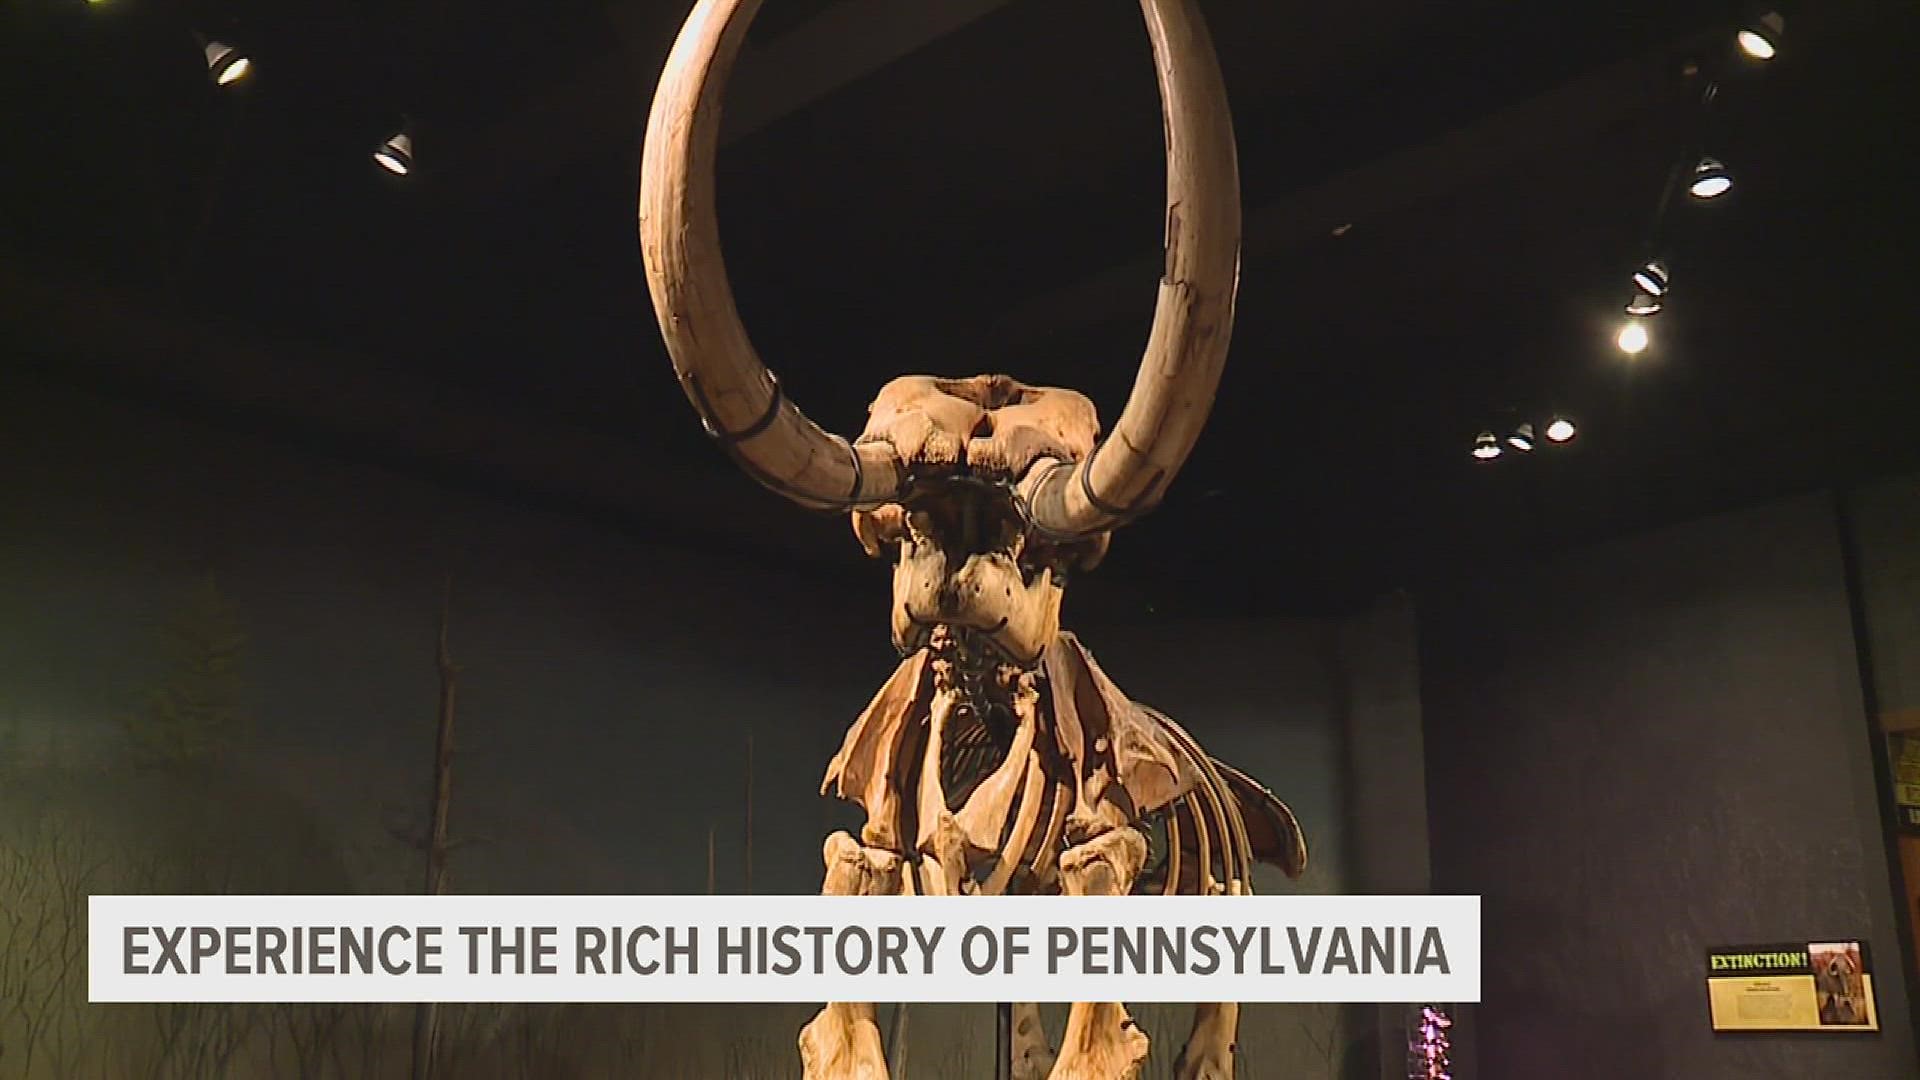 This week, we’re showing you where you can experience the rich history of Pennsylvania, just steps from the State Capitol building in Harrisburg.